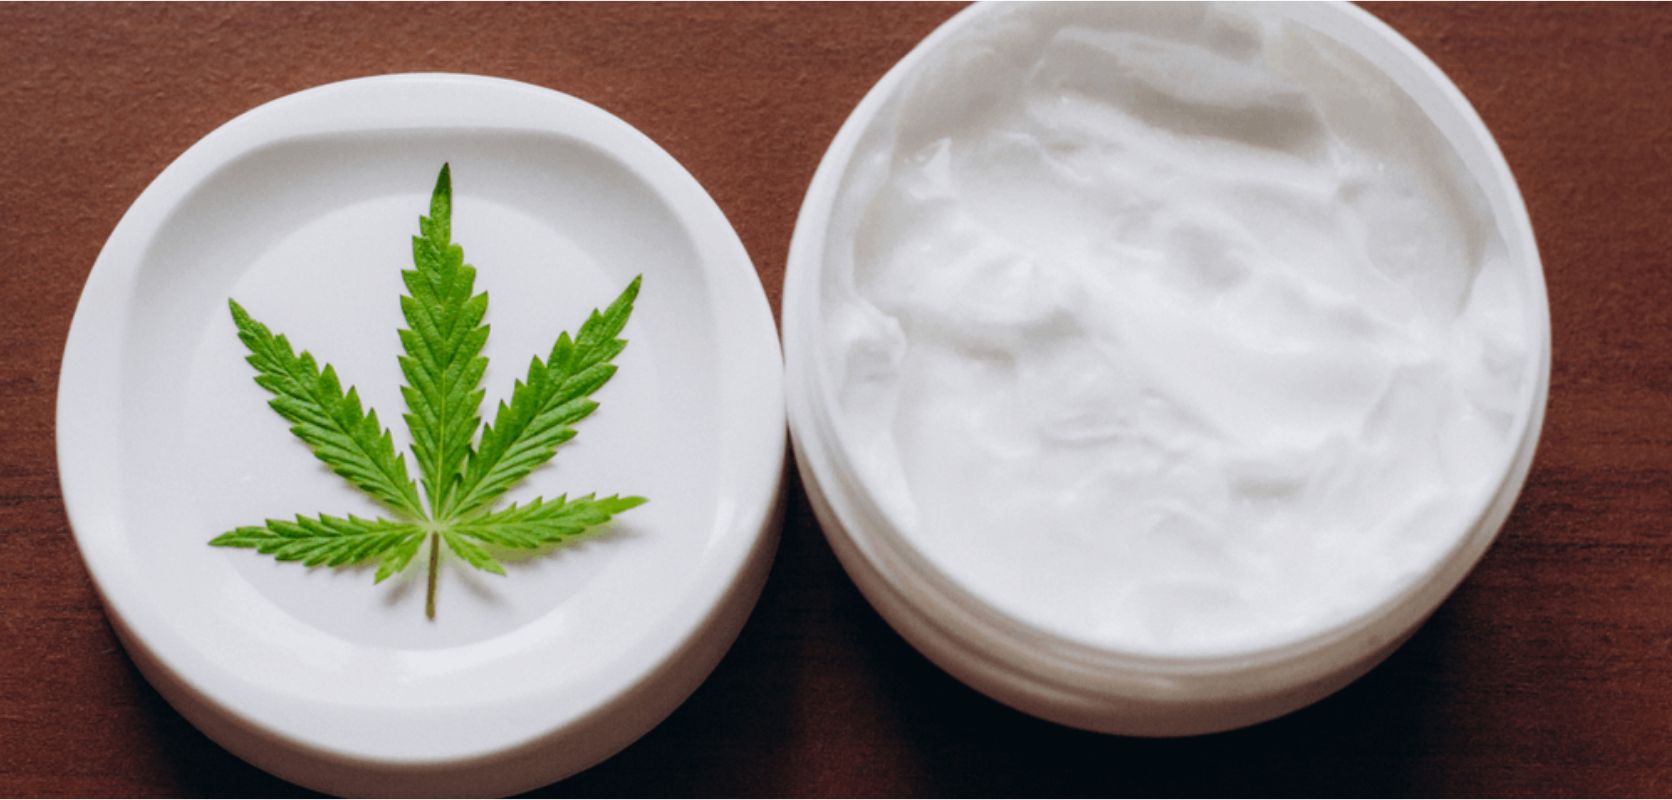 Lately, all the more humans are prone to using THC cream for arthritis pain - and have reported noticeable relief.